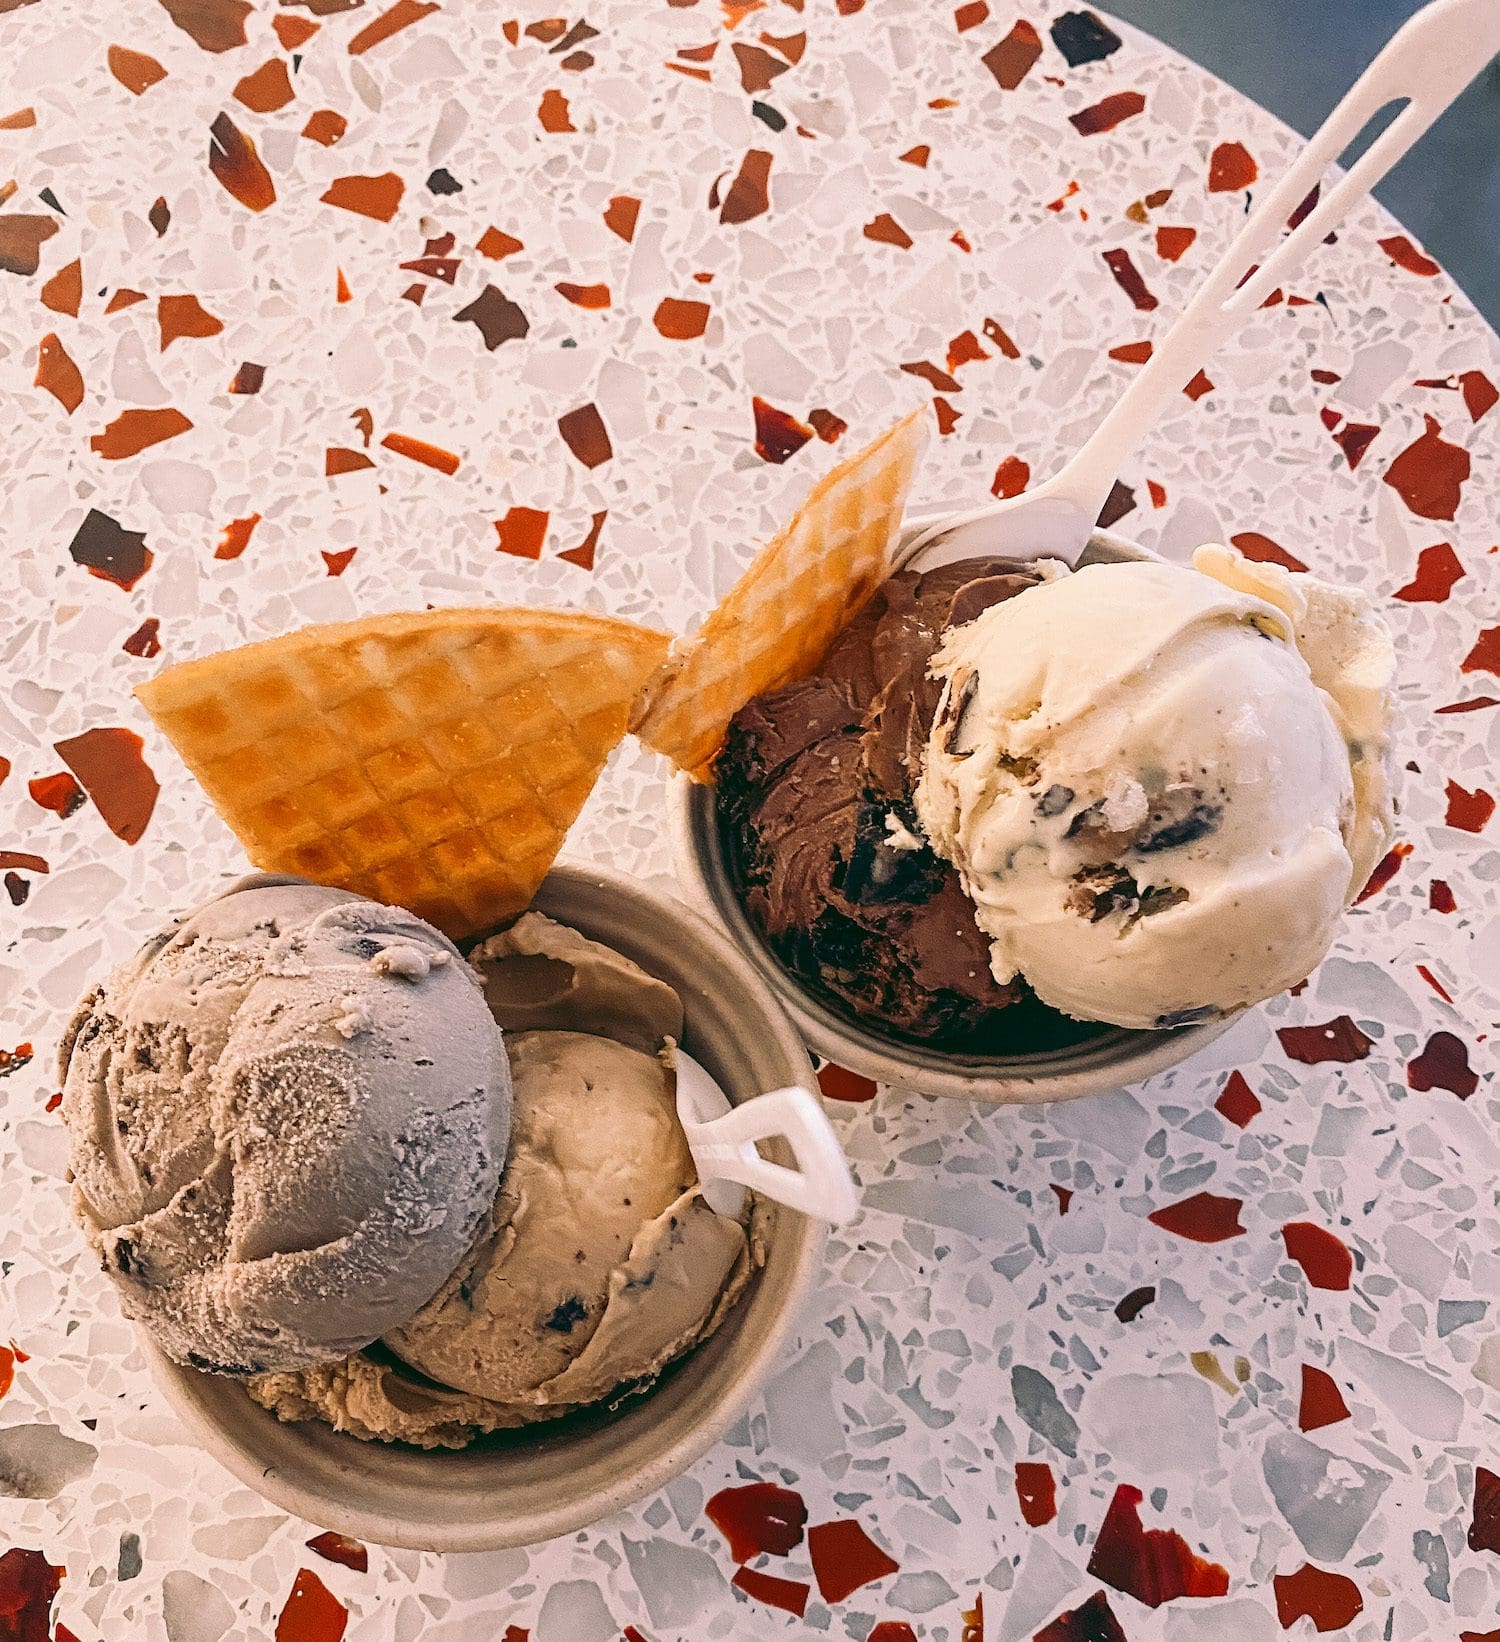 Generous ice cream servings at Chill Bros. Scoop Shop in Tampa